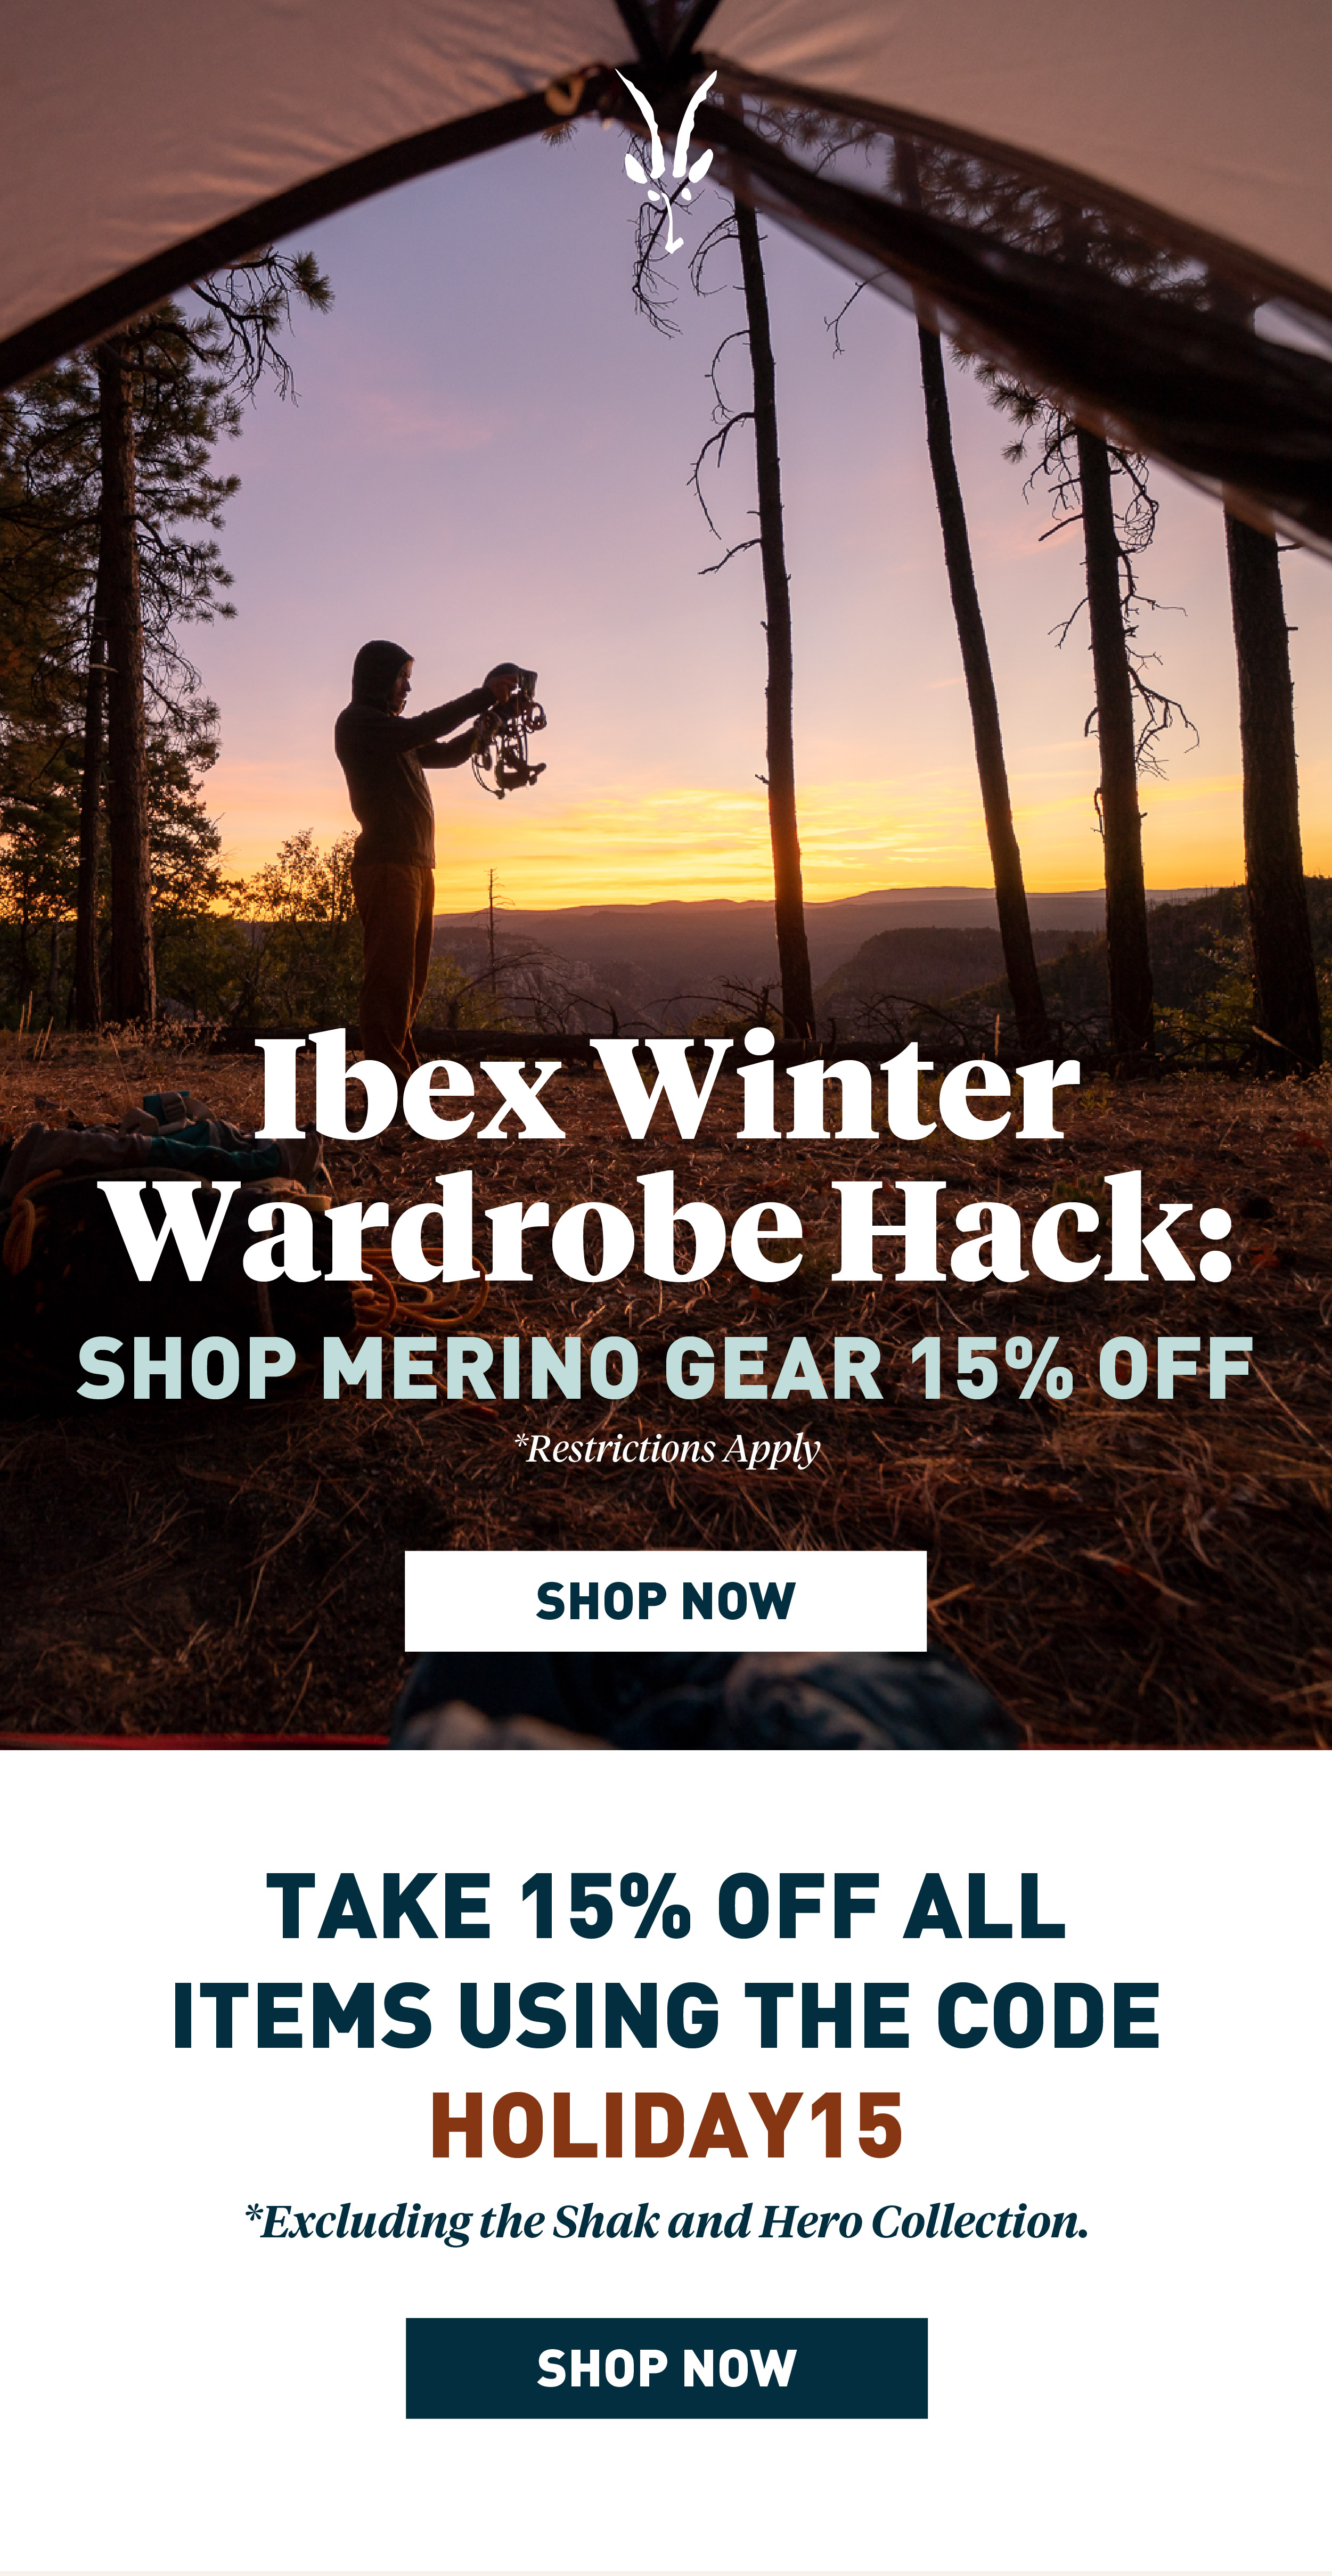 Take 15% Off Sitewide